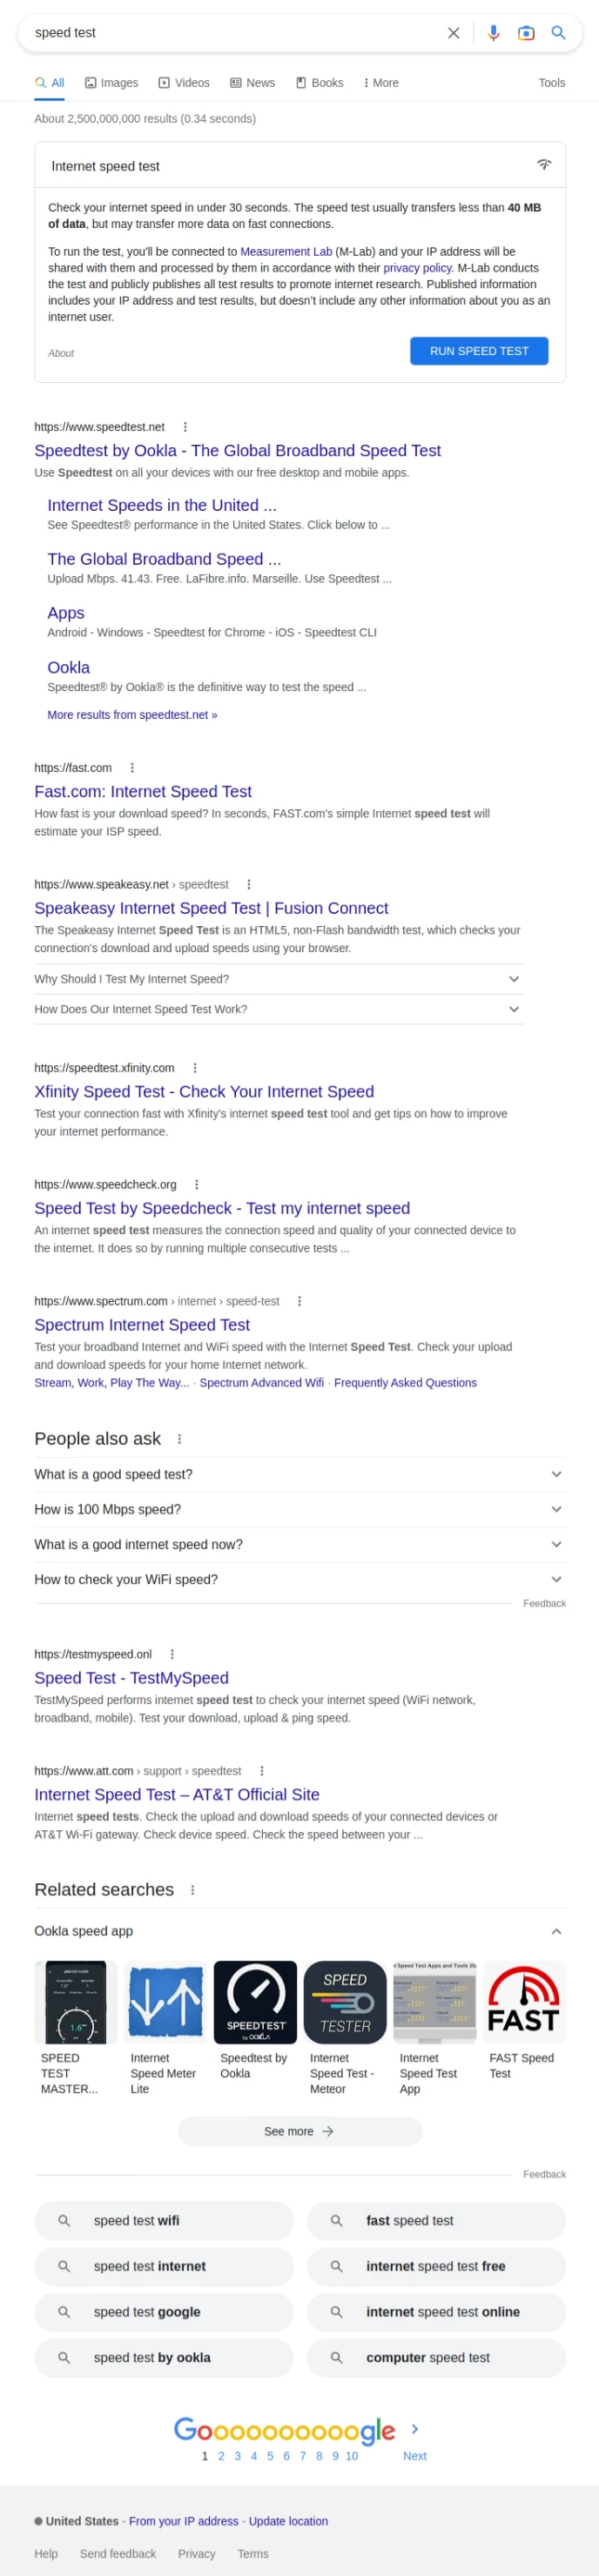 Google's result page when searching for speed test (January 30)